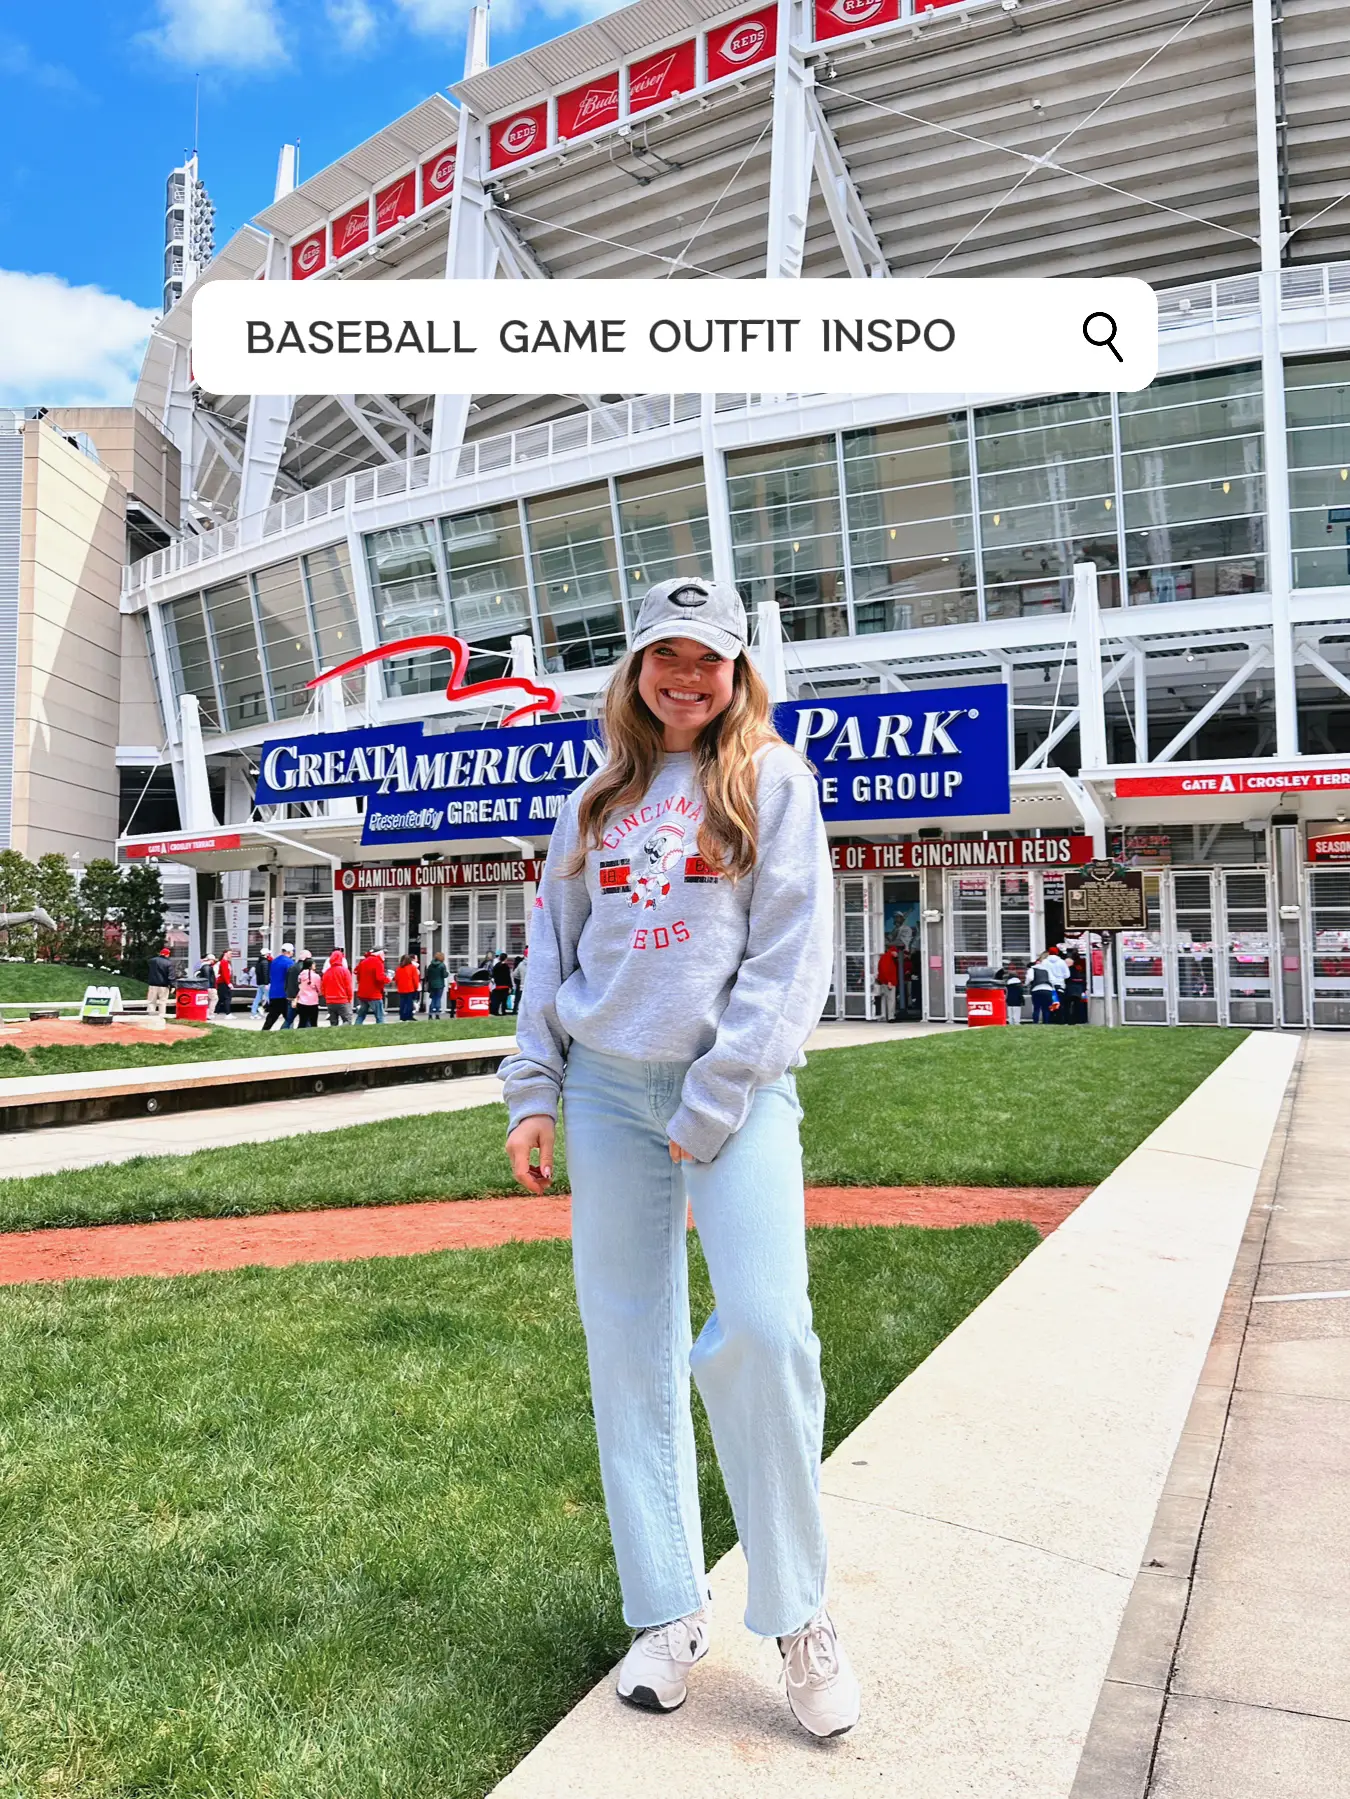 BASEBALL GAME OUTFIT INSPO, Gallery posted by Bri Ferreri